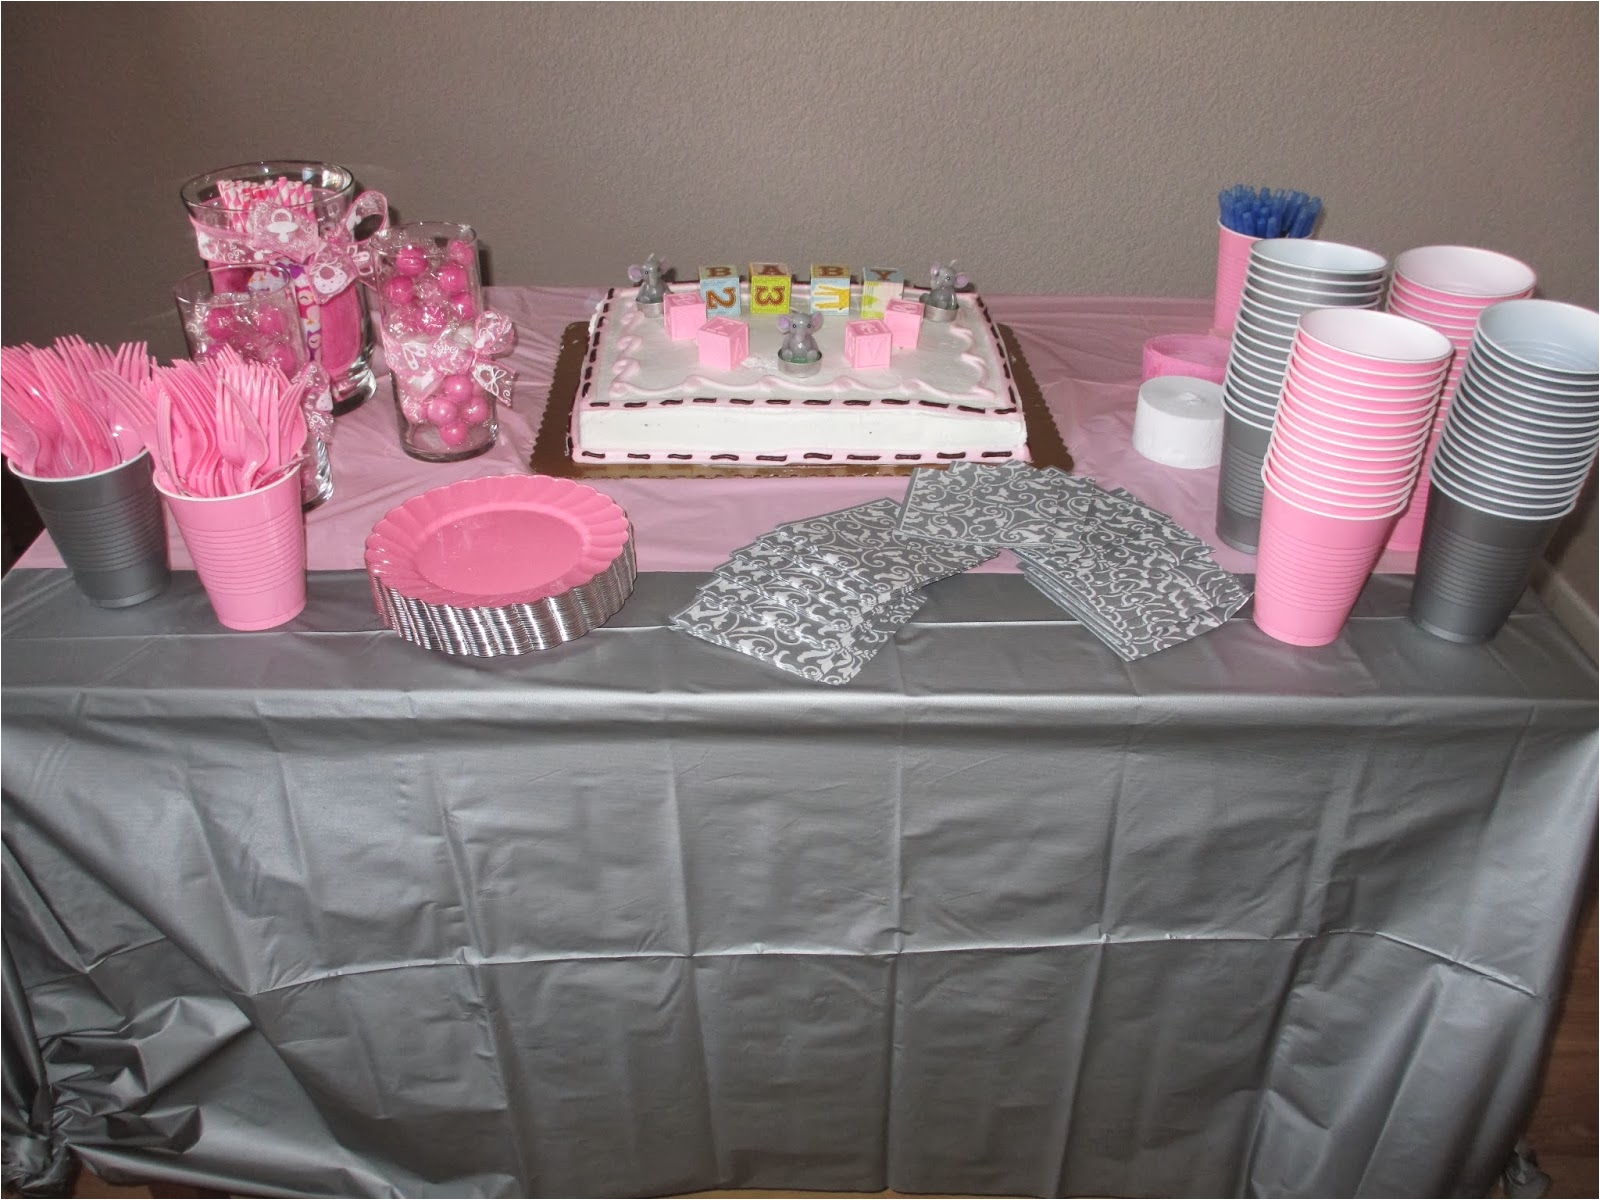 baby shower decoration ideas with cool themes where for showers good favors girl food decorations perfect